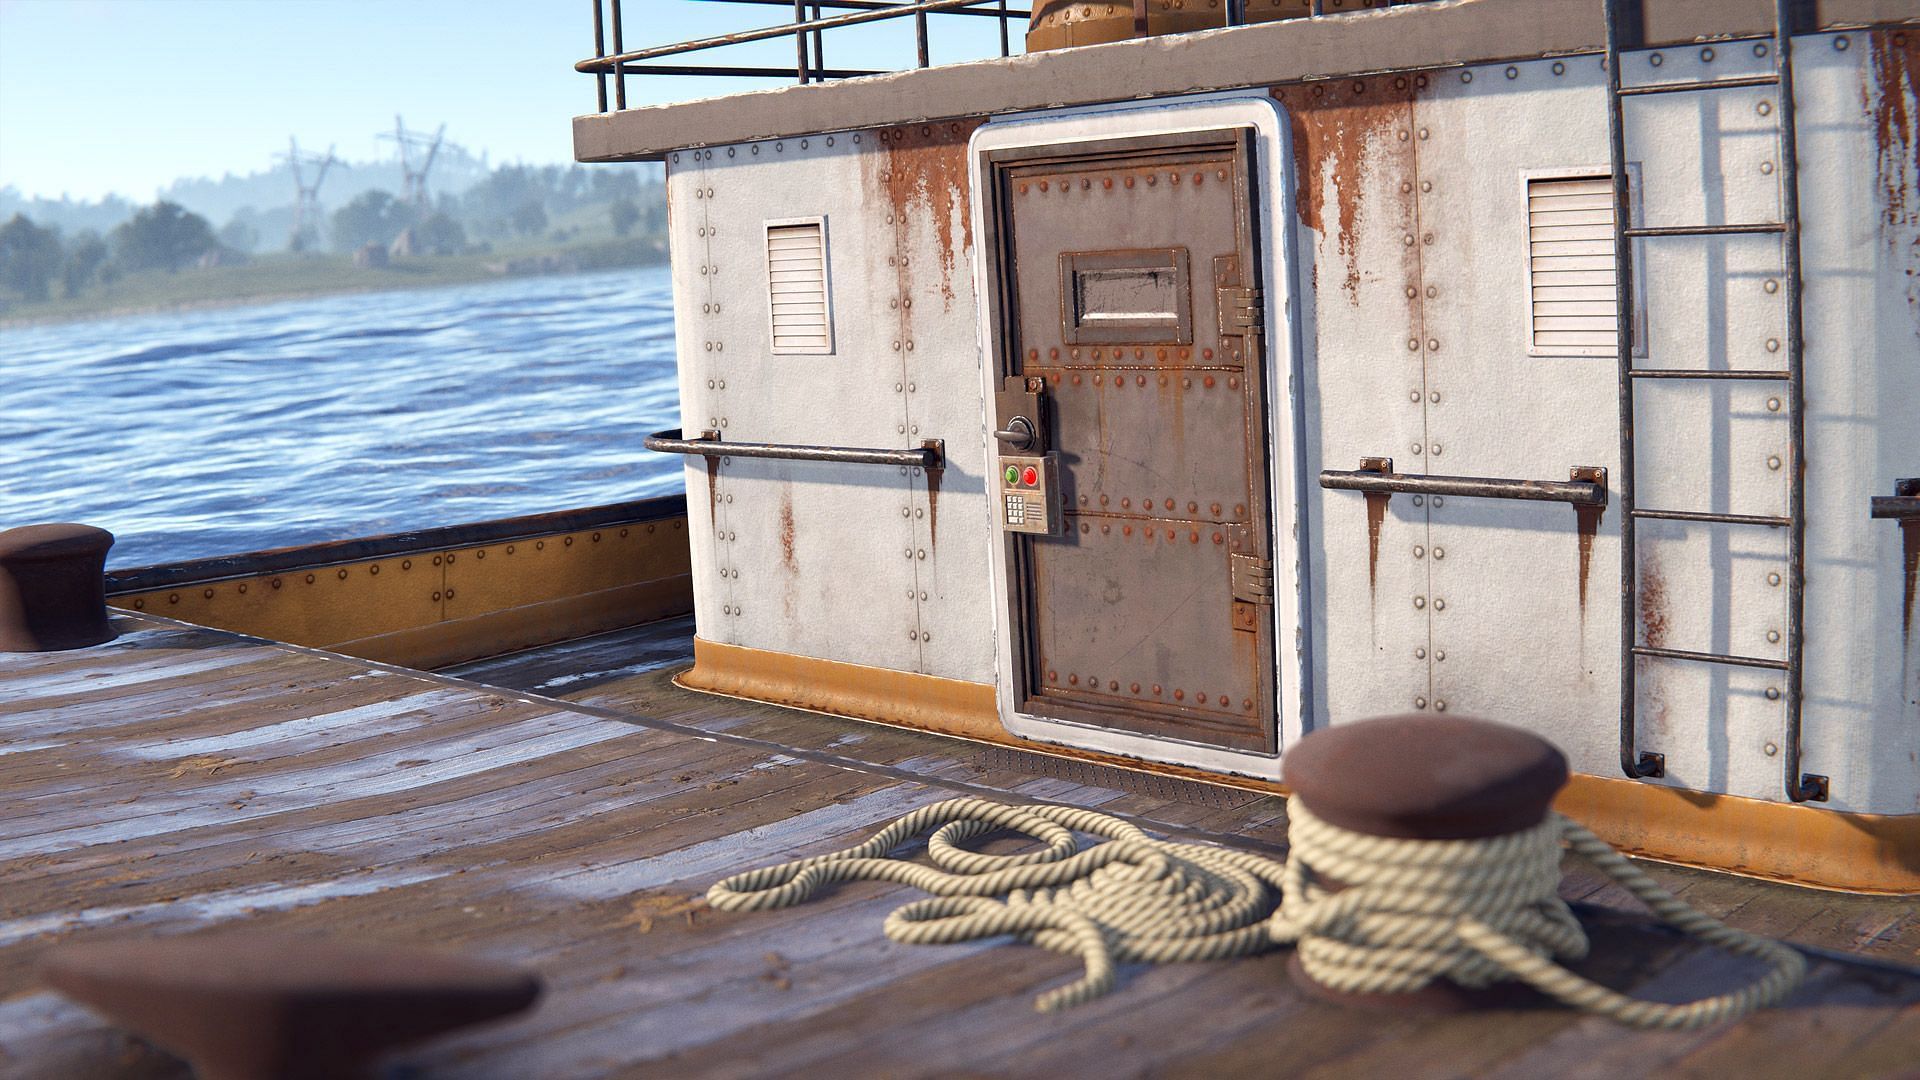 Deployables placed on Tugboat (Image via Facepunch Studios)